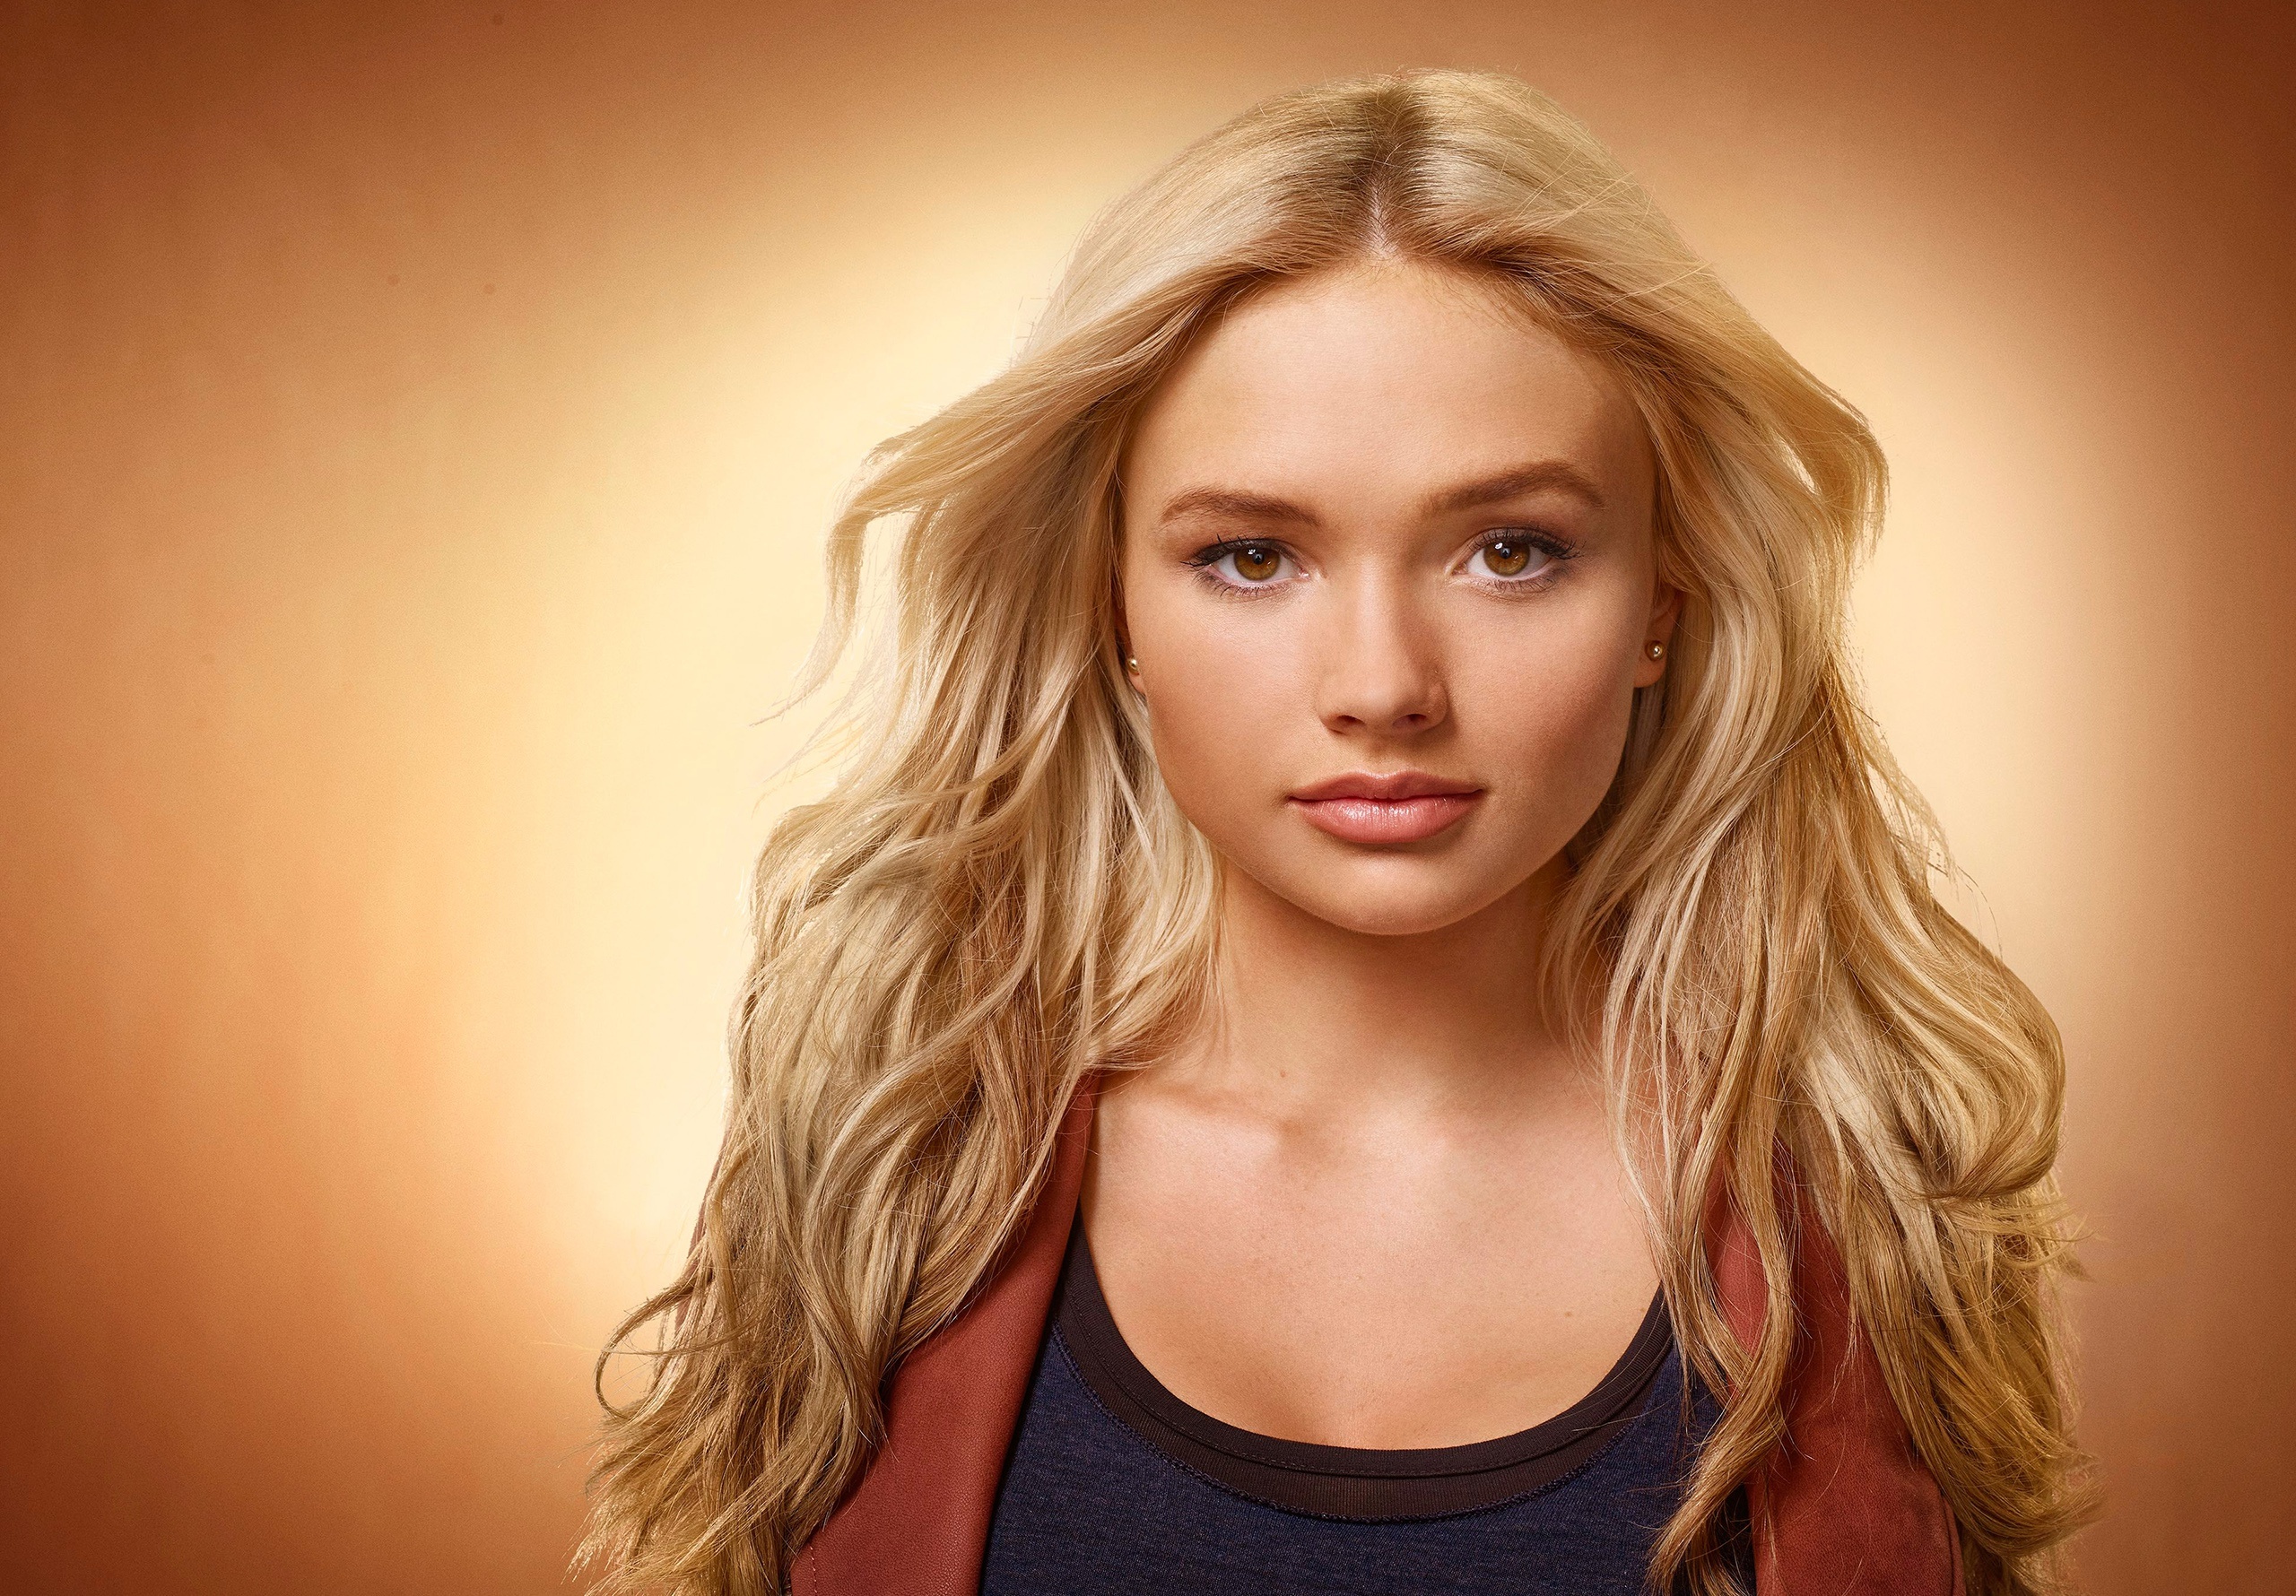 The Gifted TV series, Natalie Alyn Lind wallpapers, Captivating images, Talented actress, 2560x1780 HD Desktop